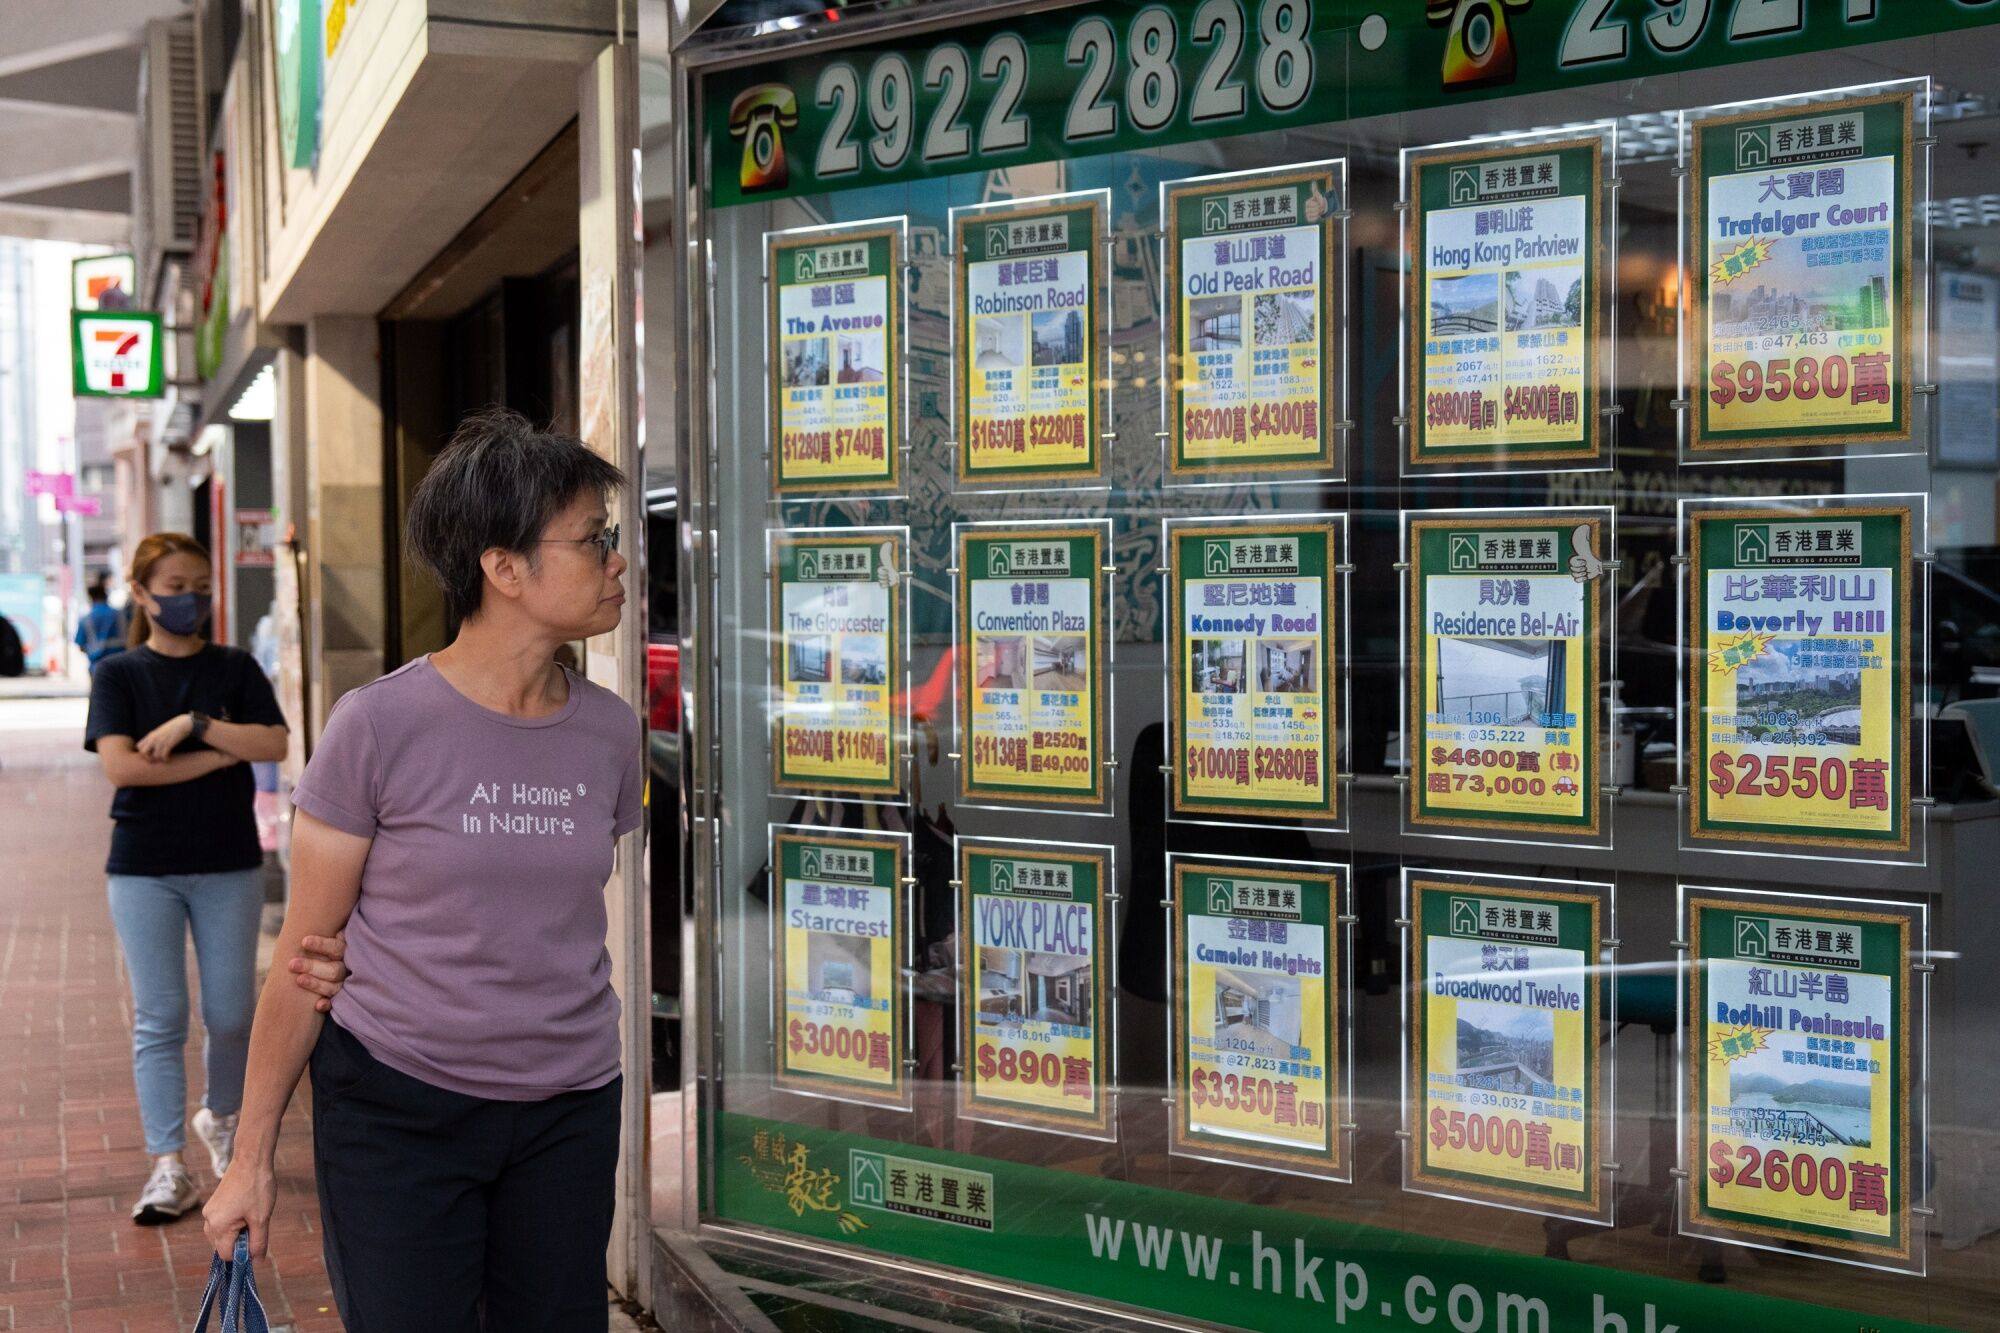 Residential property advertisements are seen at a real estate agency in Hong Kong on September 24, 2023. Photo: Bloomberg